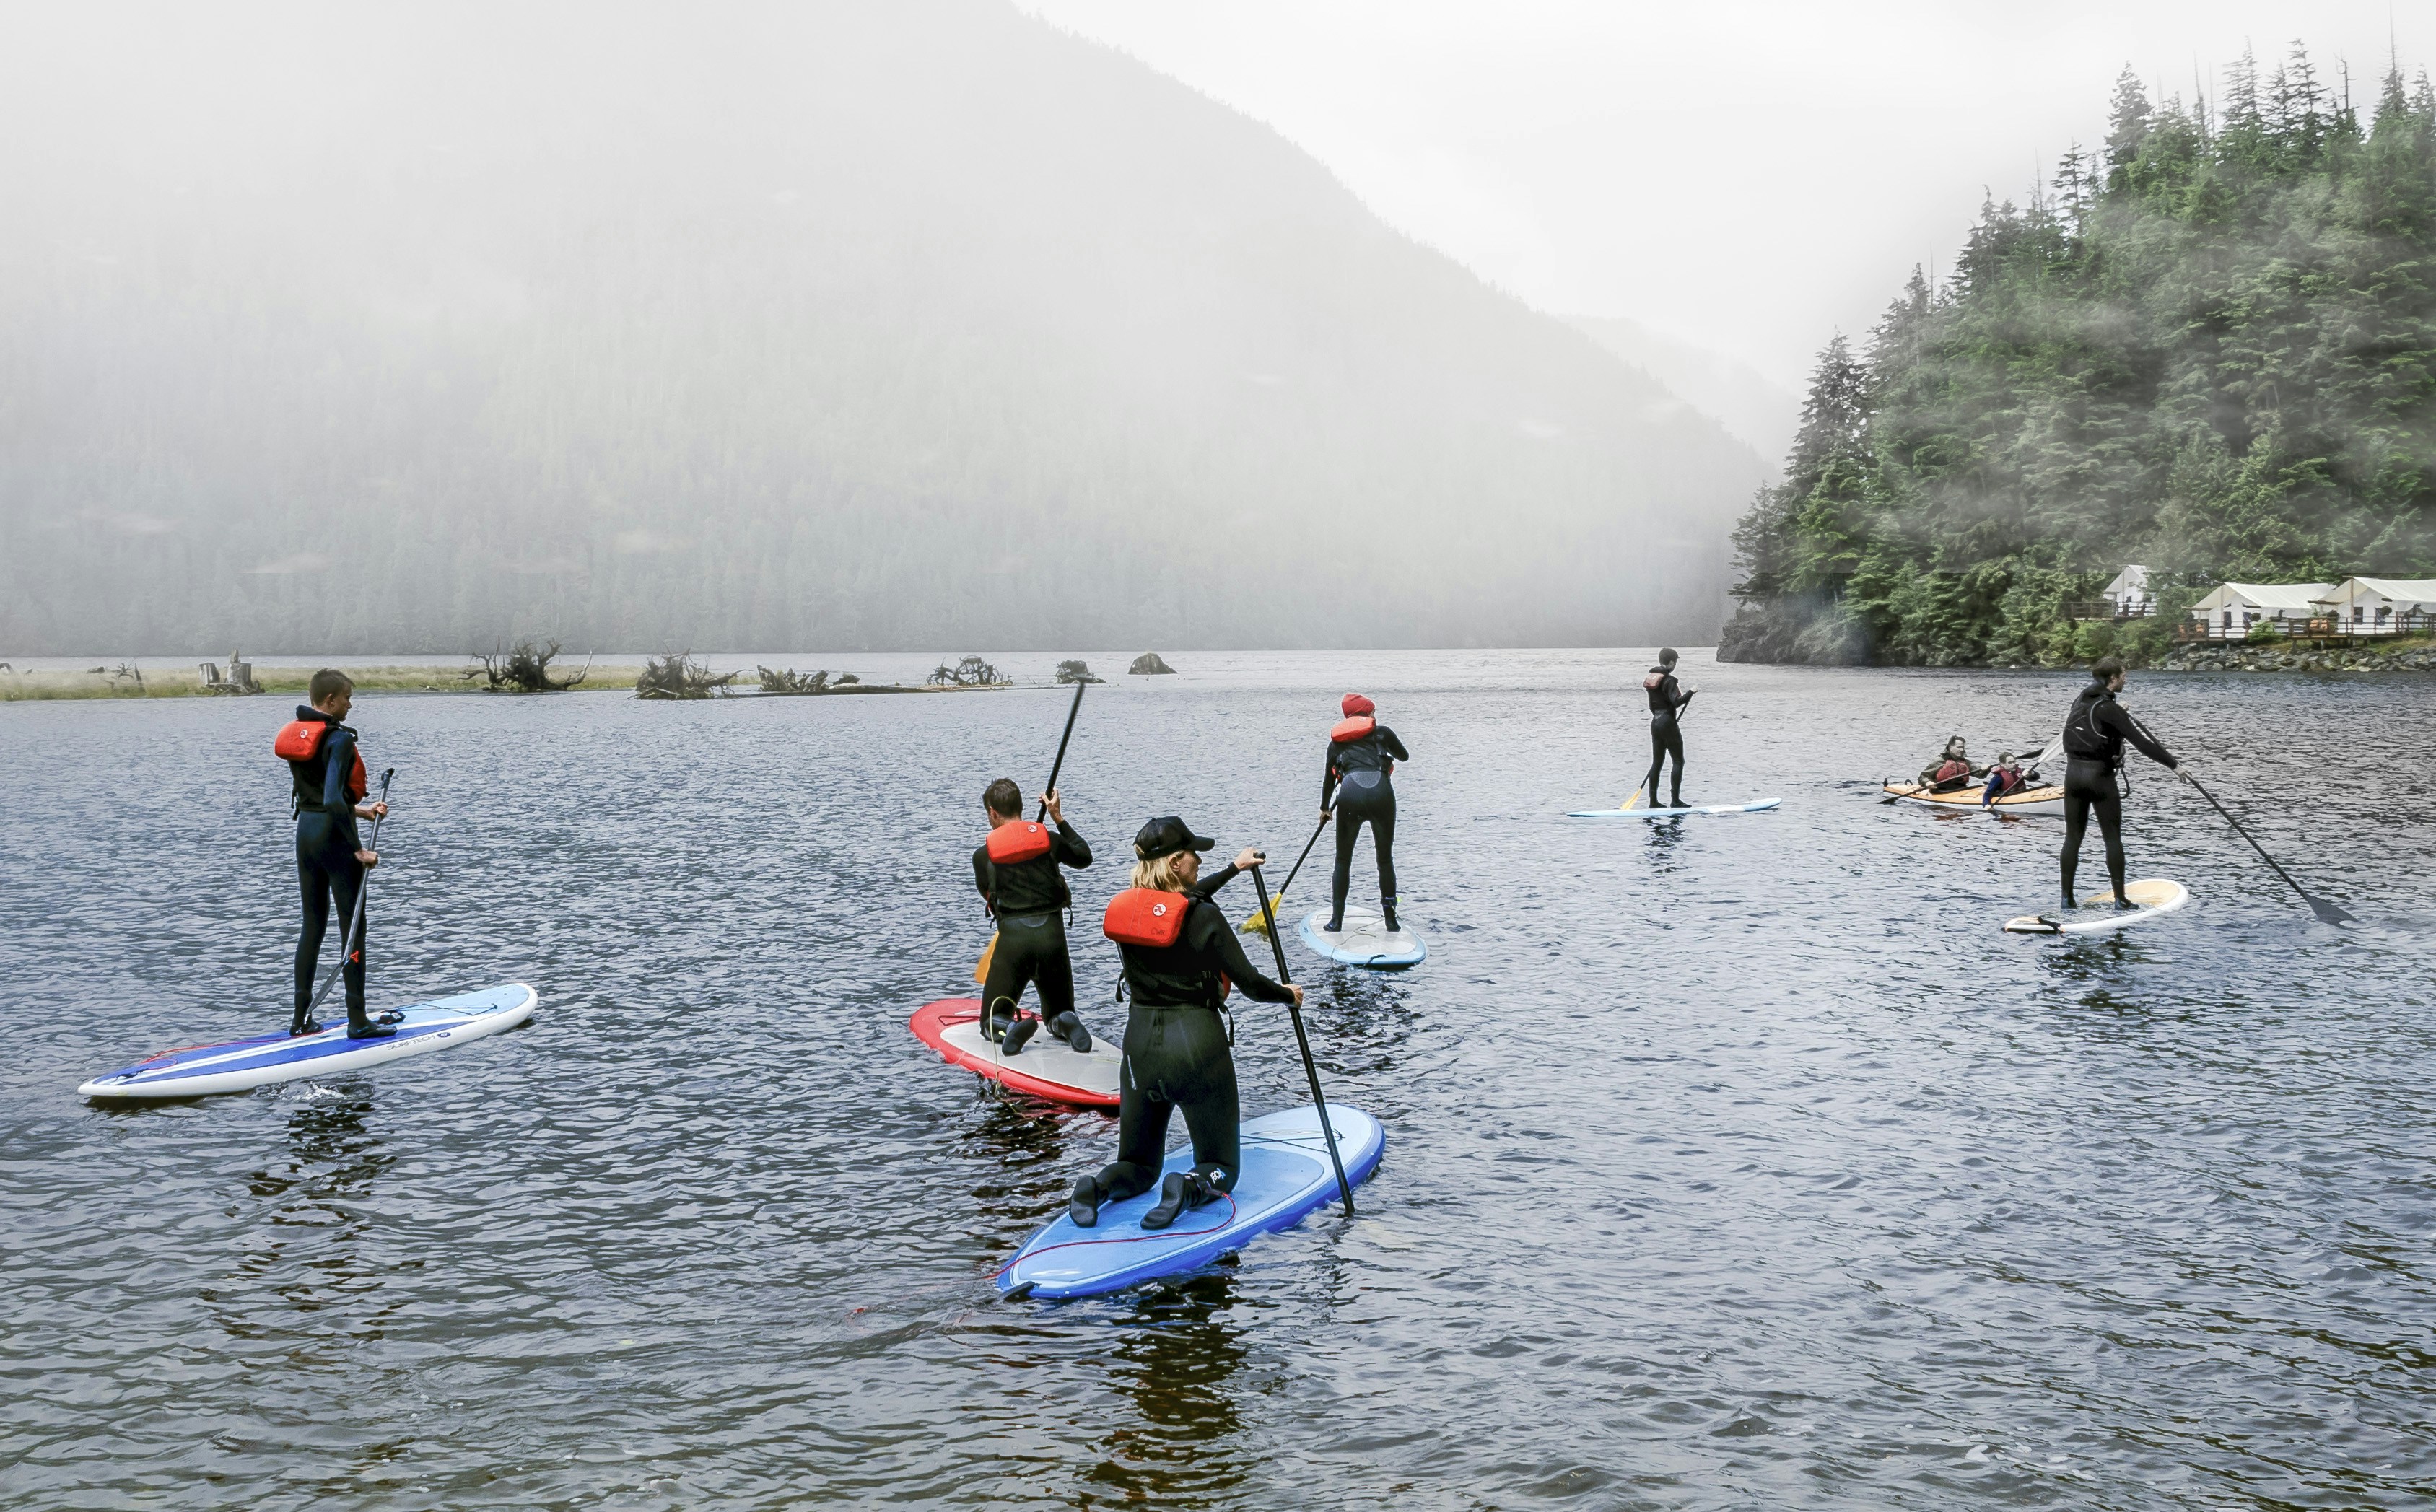 6 people paddle boarding on Clayoquot Lake, BC, Canada